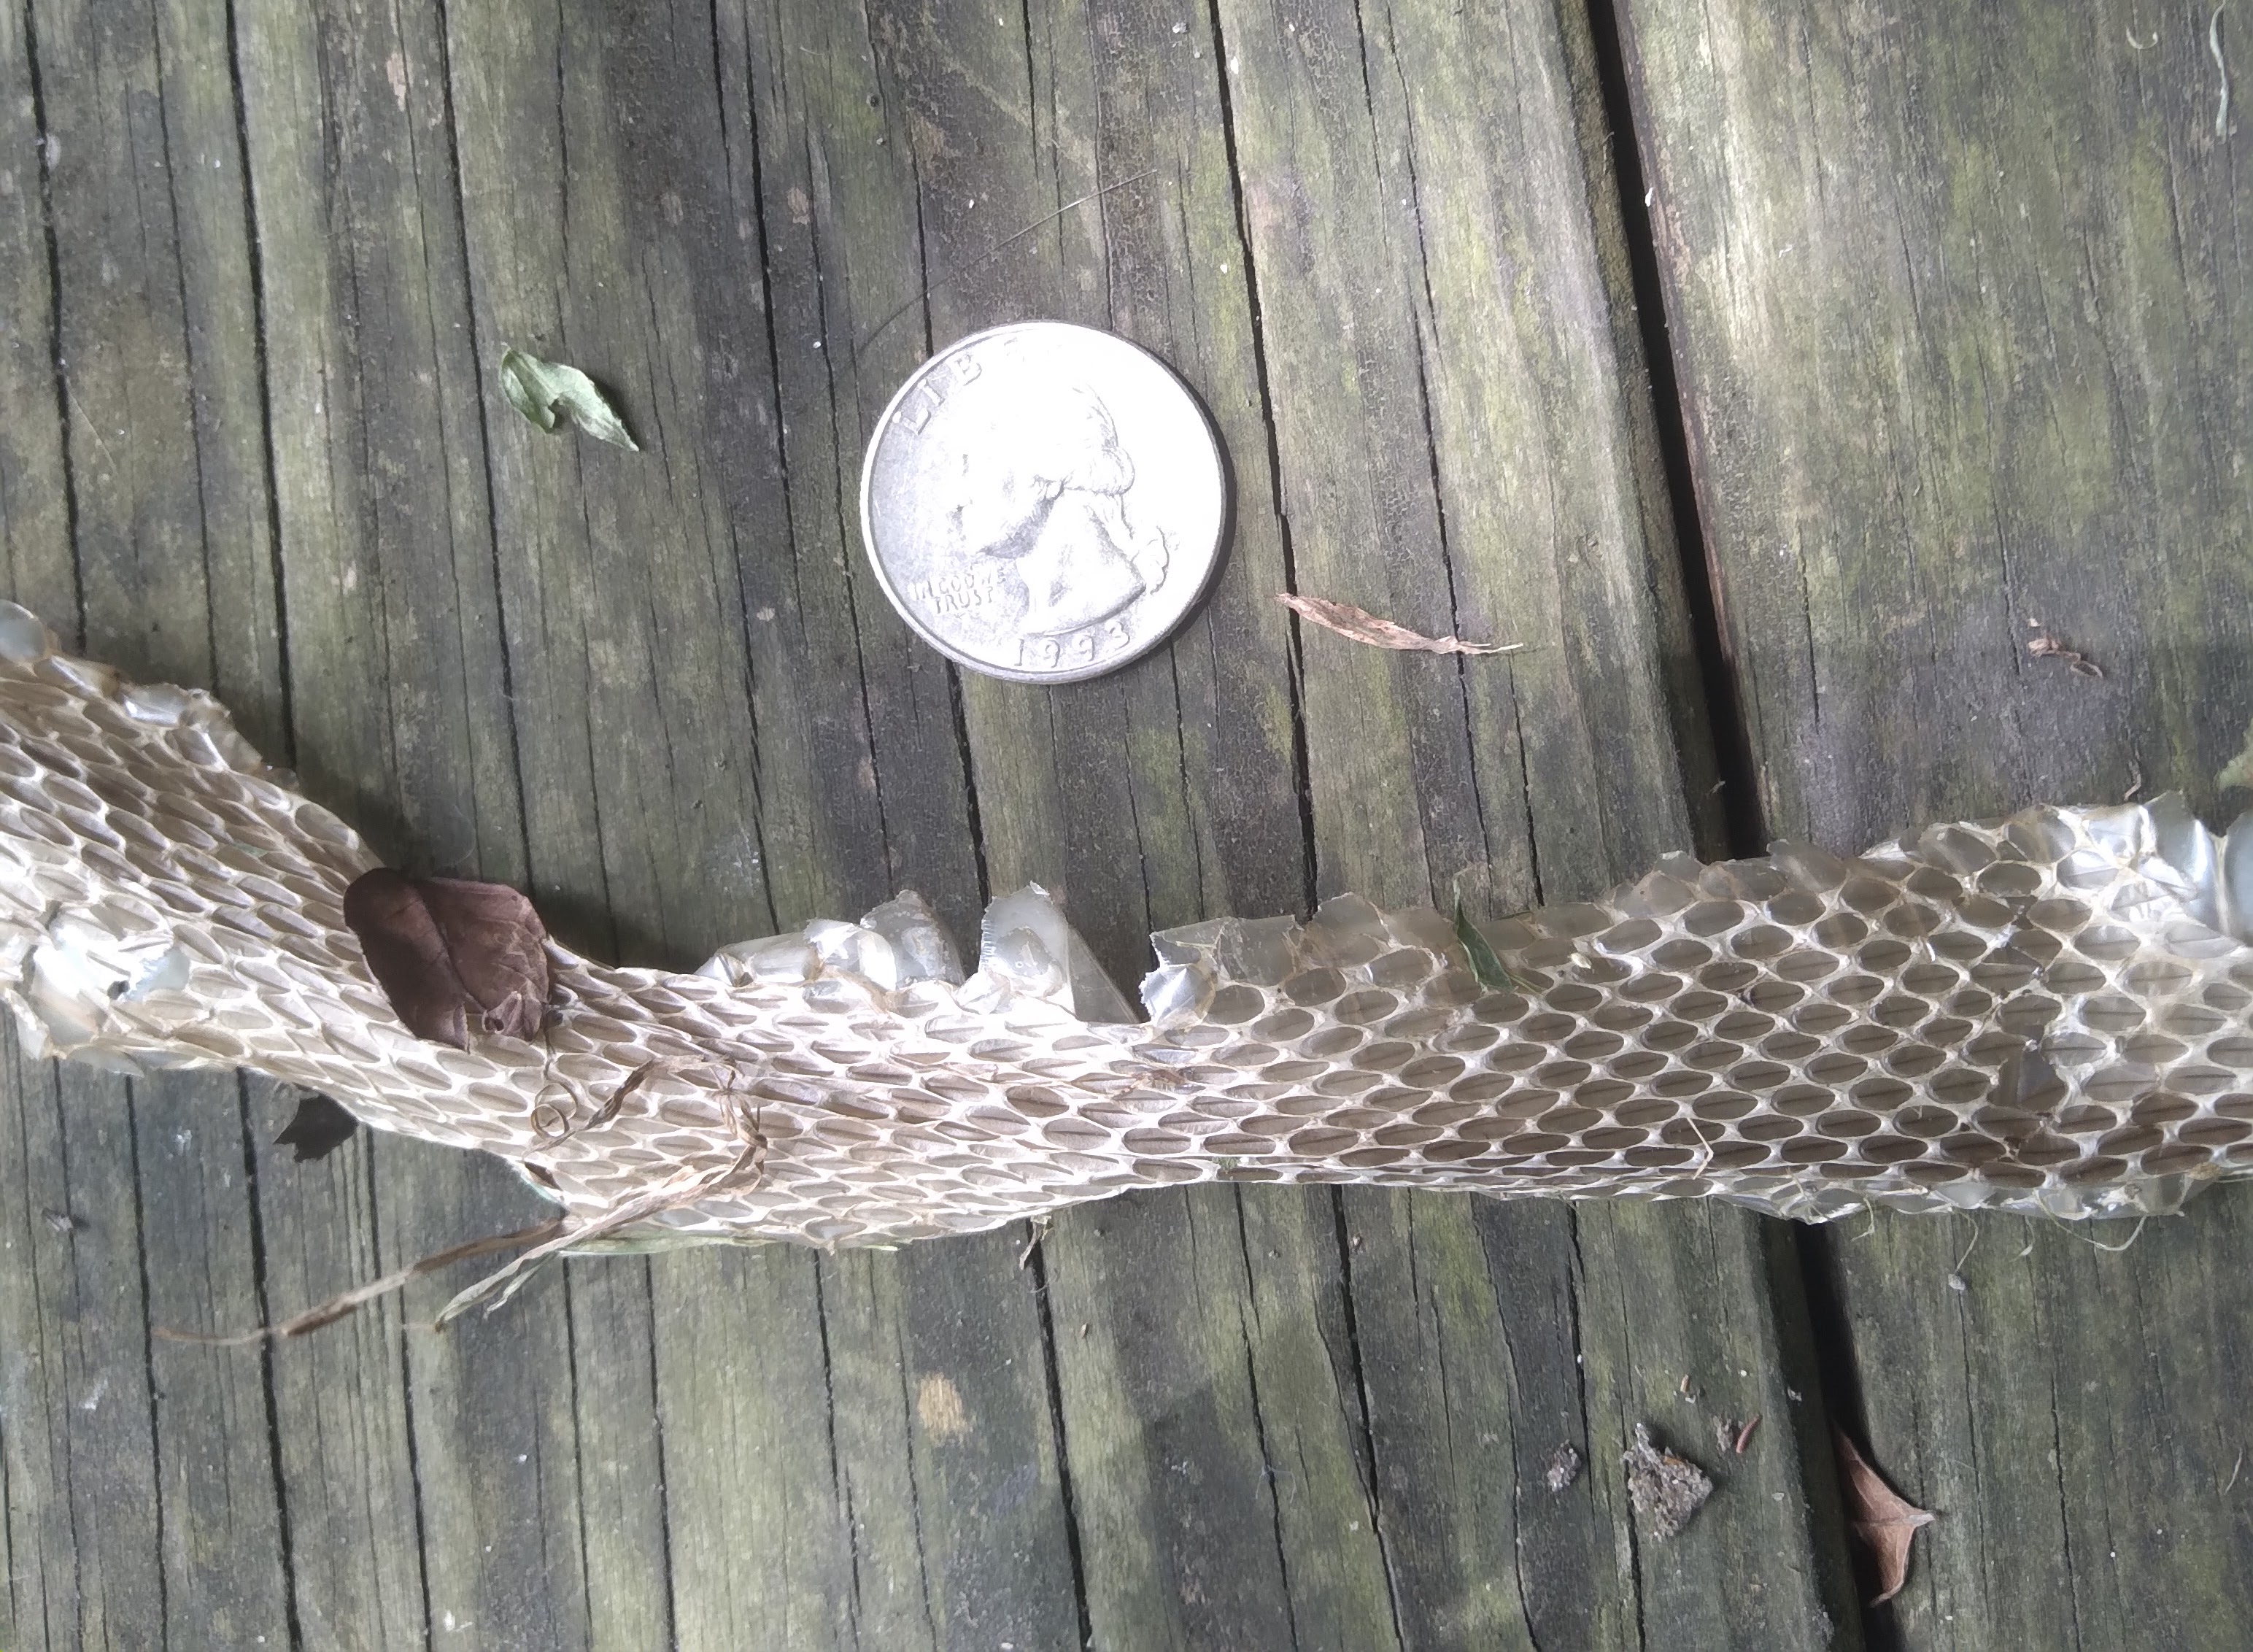 I found a shed snake skin in my fire pit.